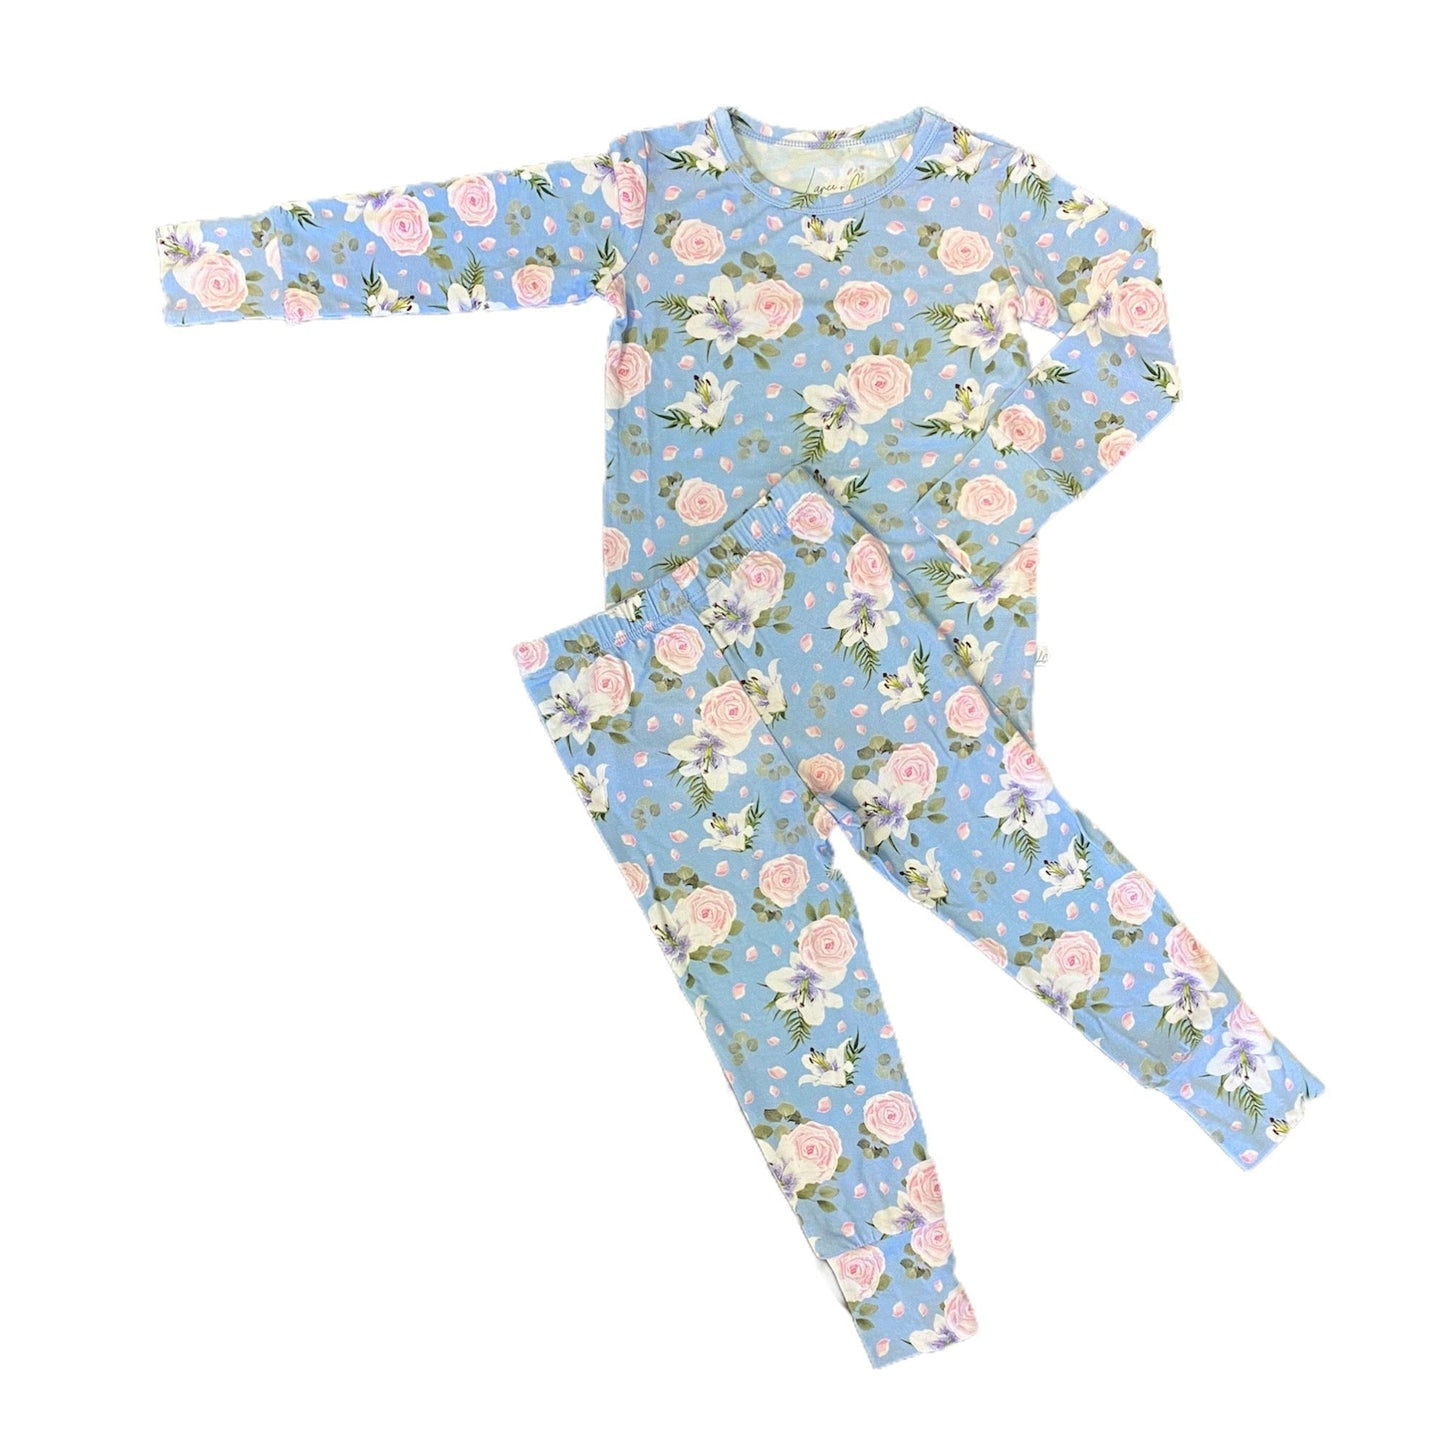 Lillian Floral Bamboo 2-Piece Long Sleeve Set-Clothing Sets-Laree + Co.